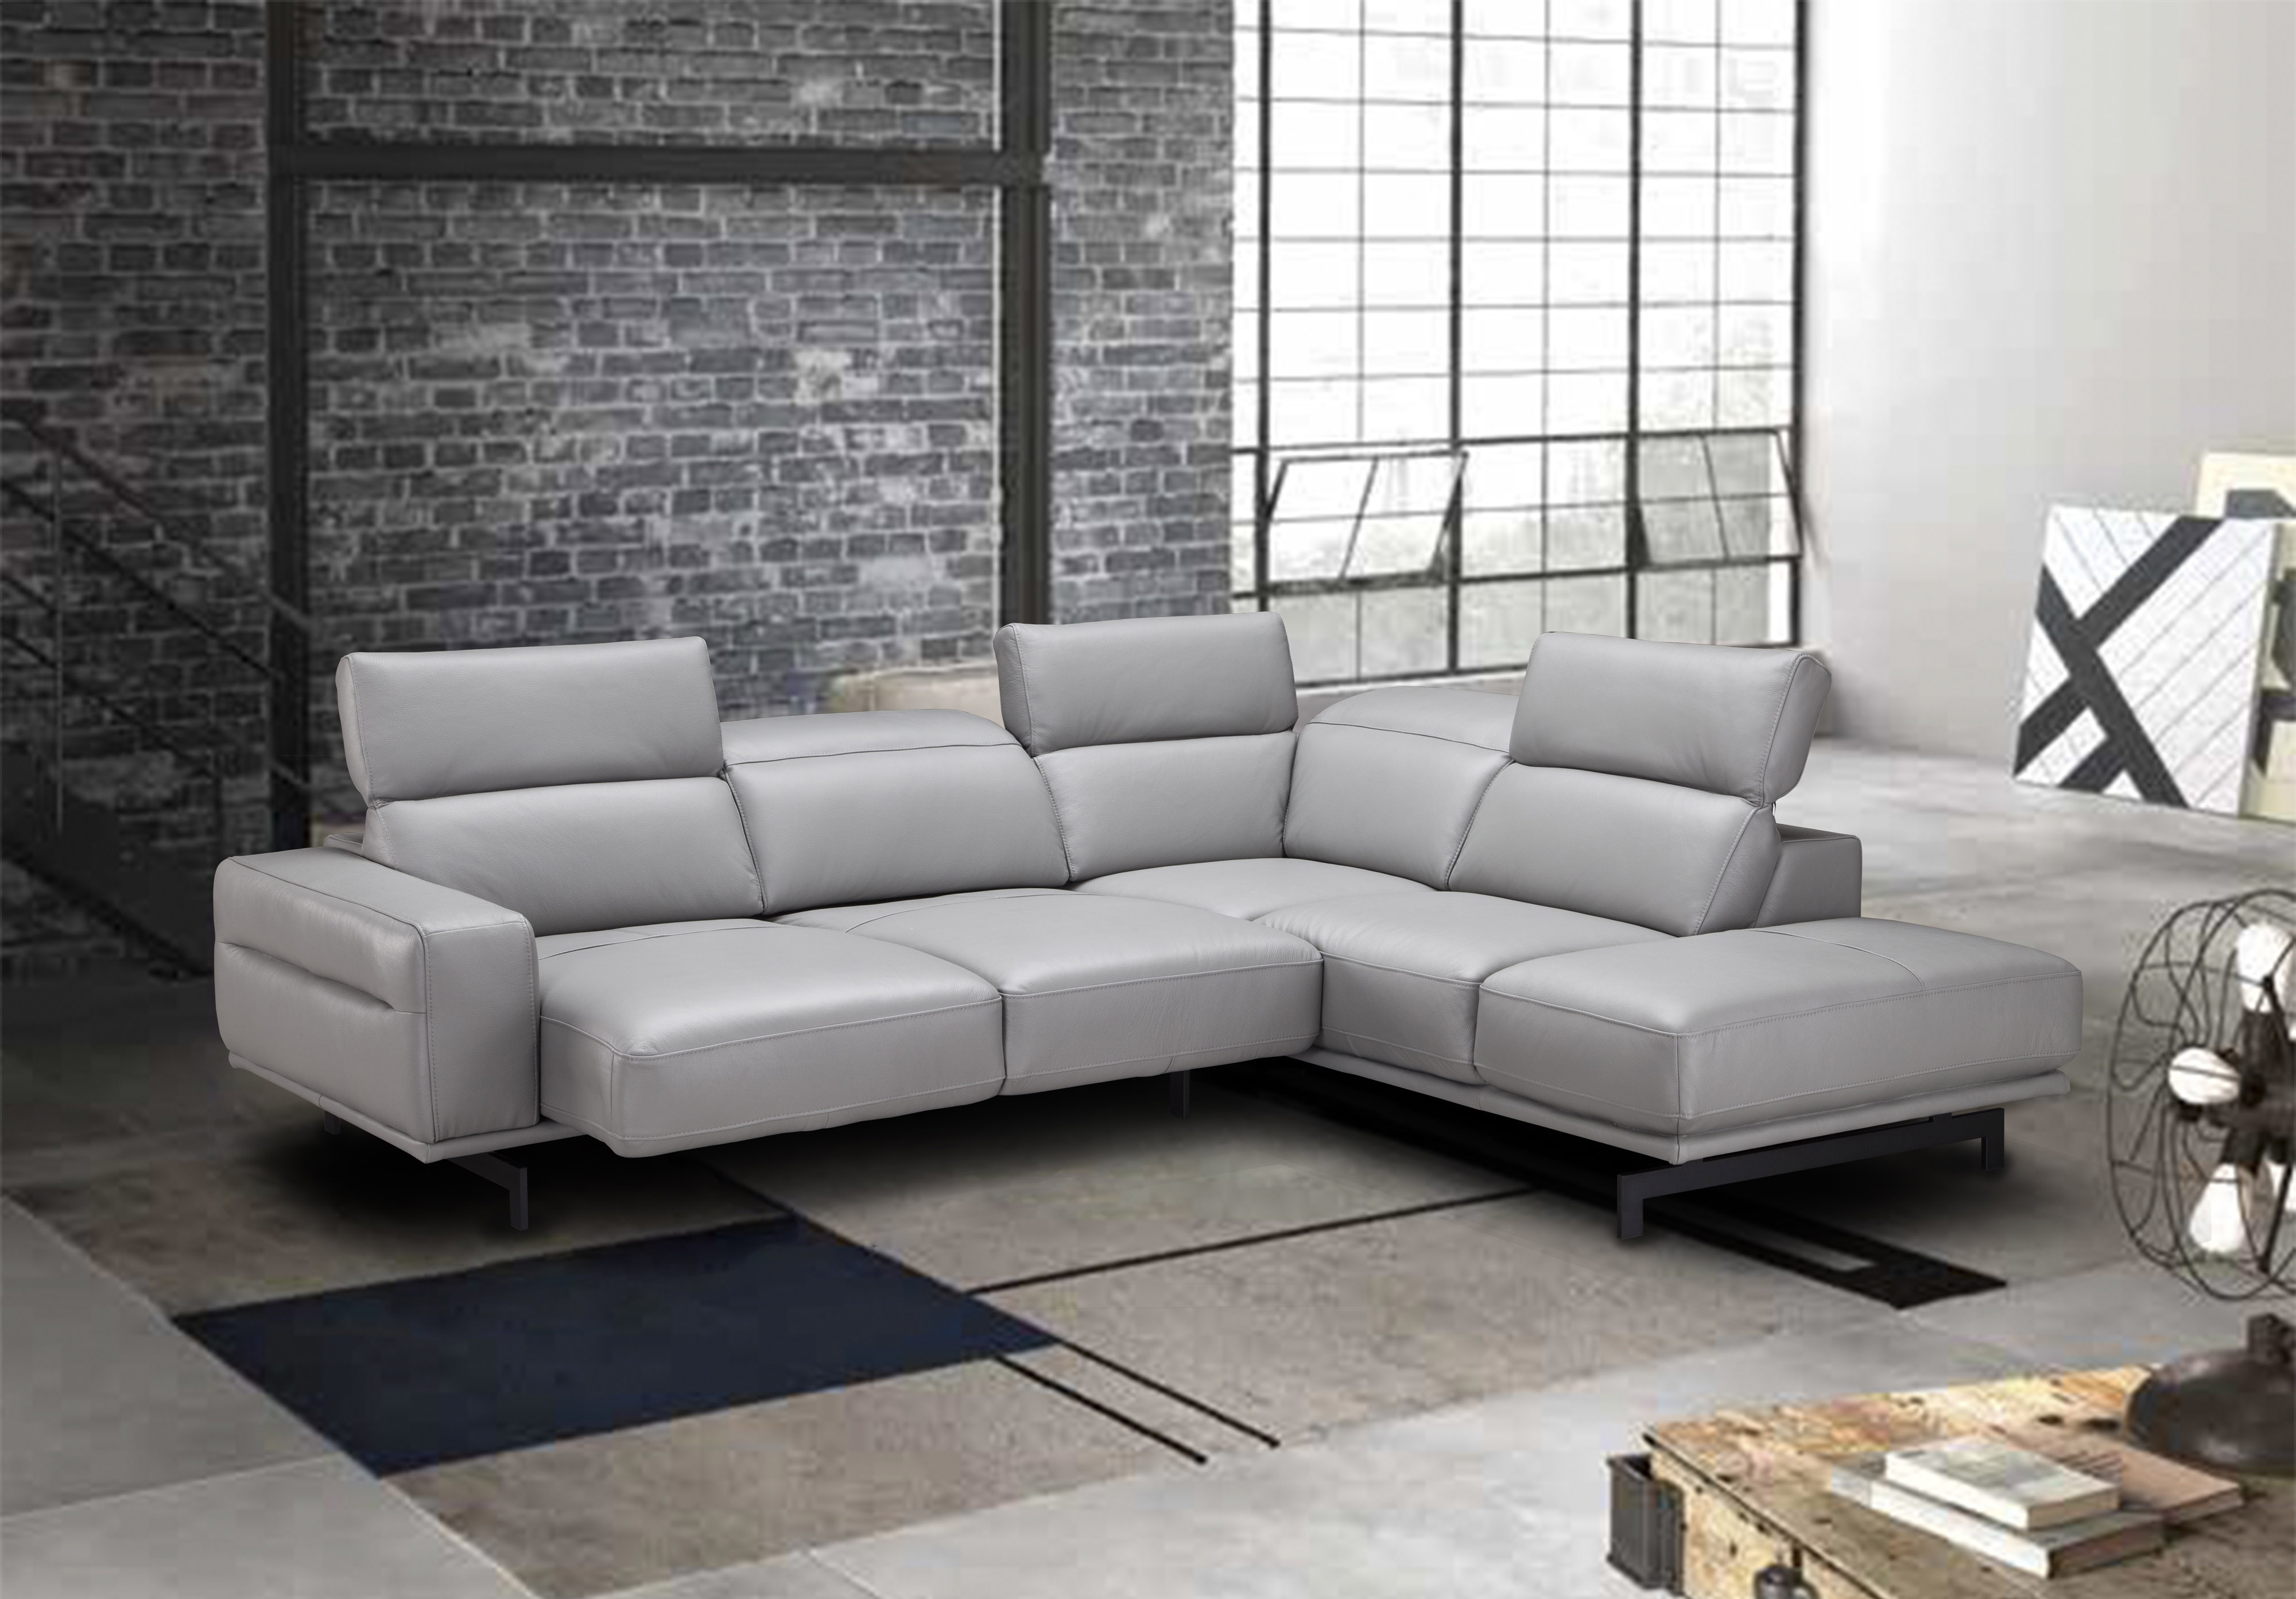 high quality sectional leather rocker sofa